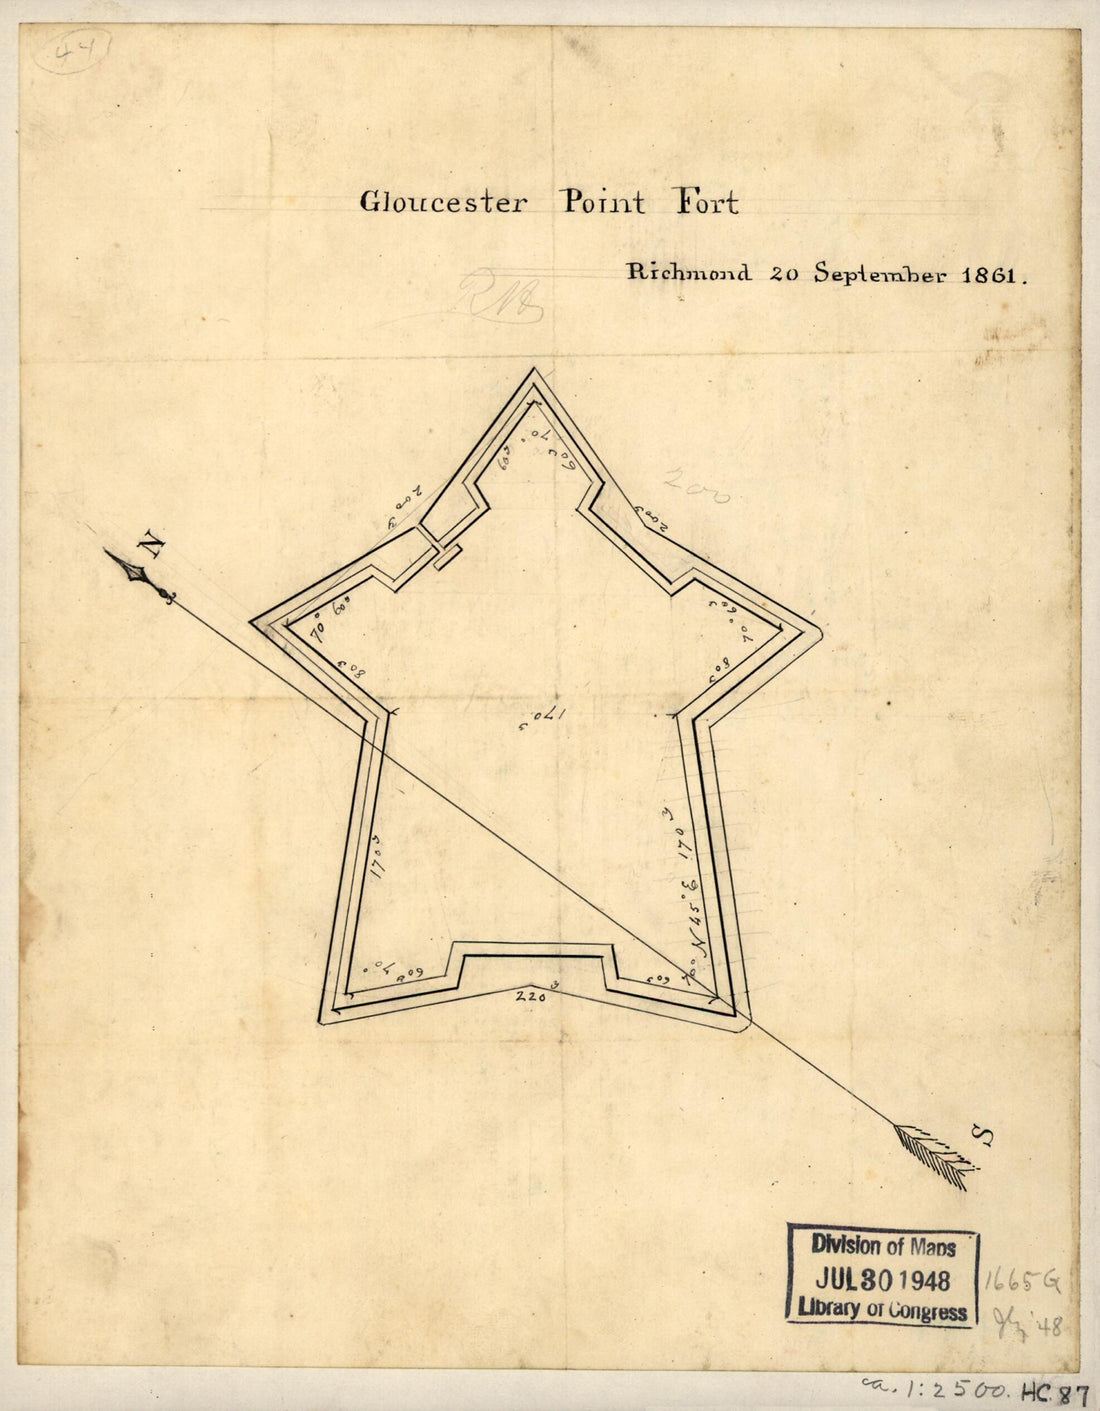 This old map of Gloucester Point Fort, Richmond, 20 September from 1861 was created by  in 1861